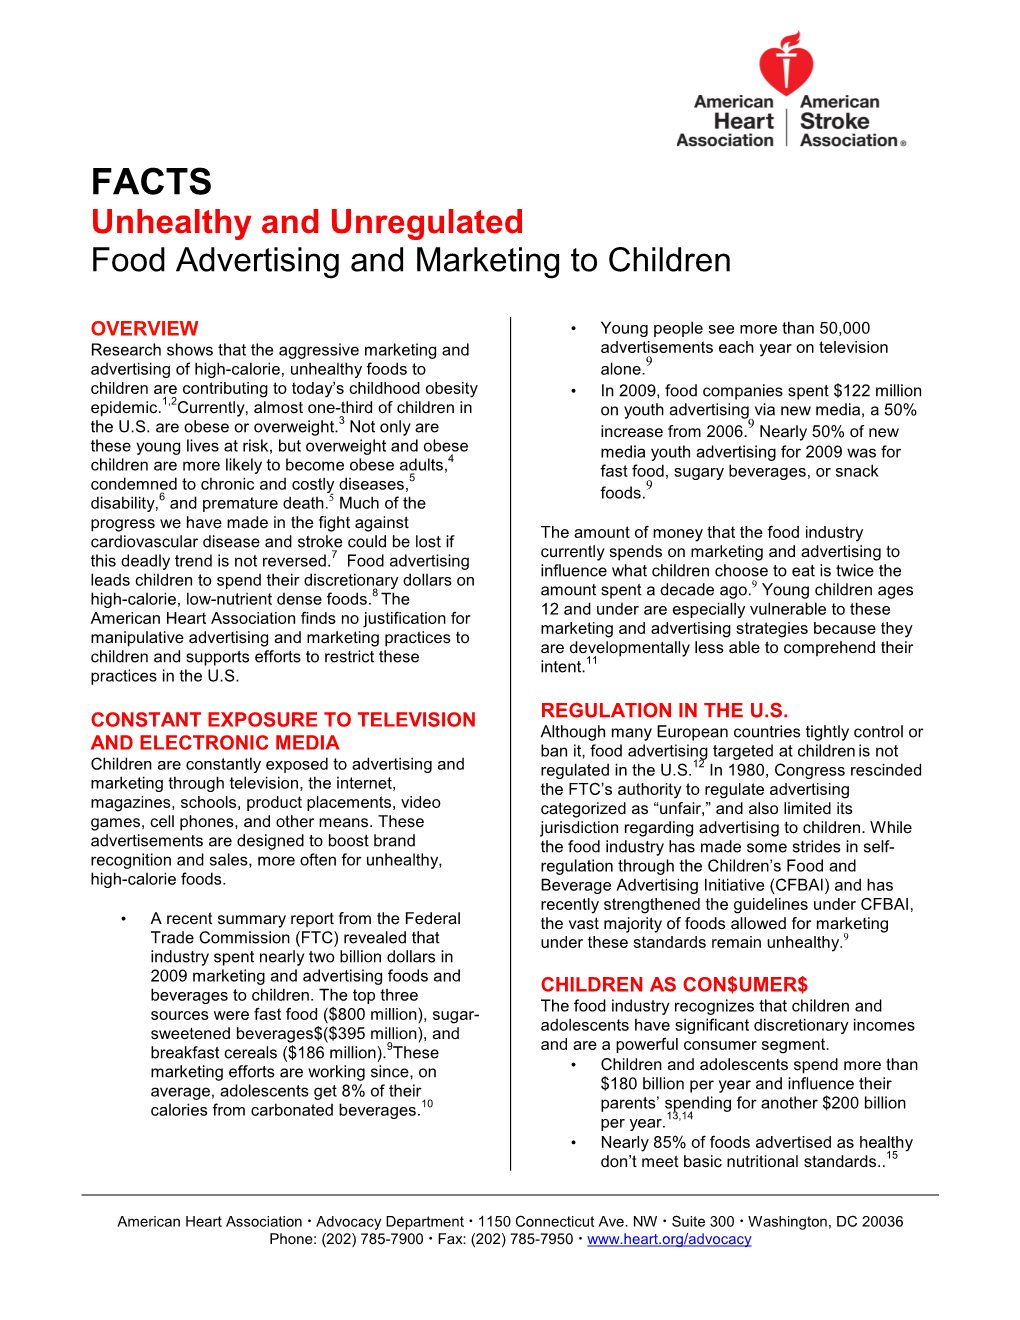 Unhealthy and Unregulated Food Advertising and Marketing to Children